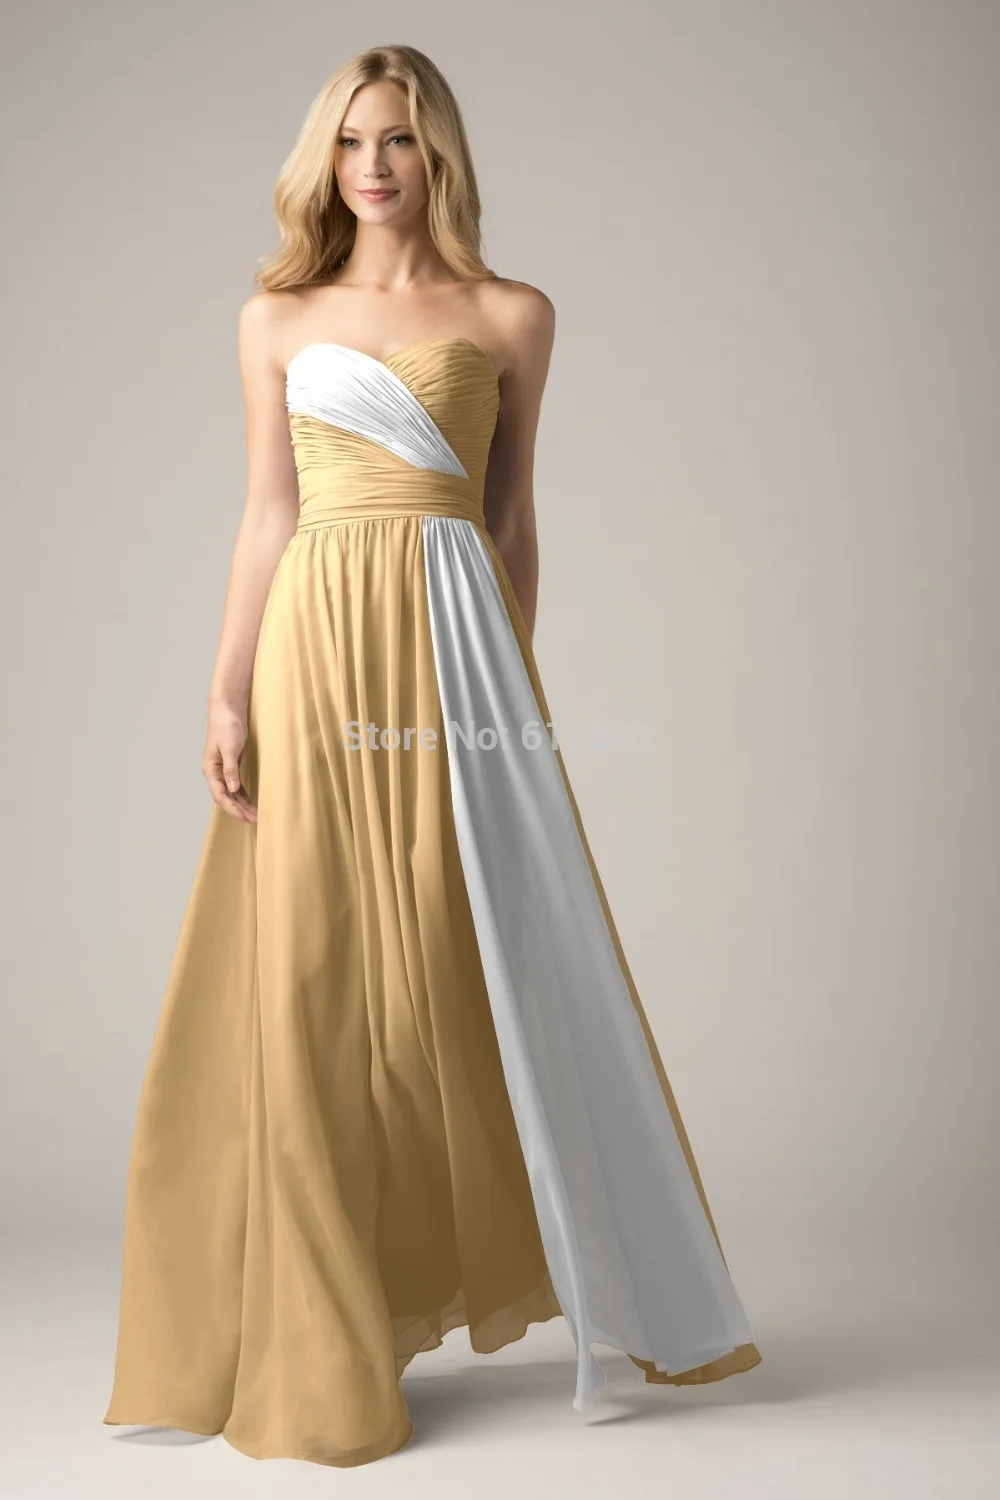 gold dresses and White prom